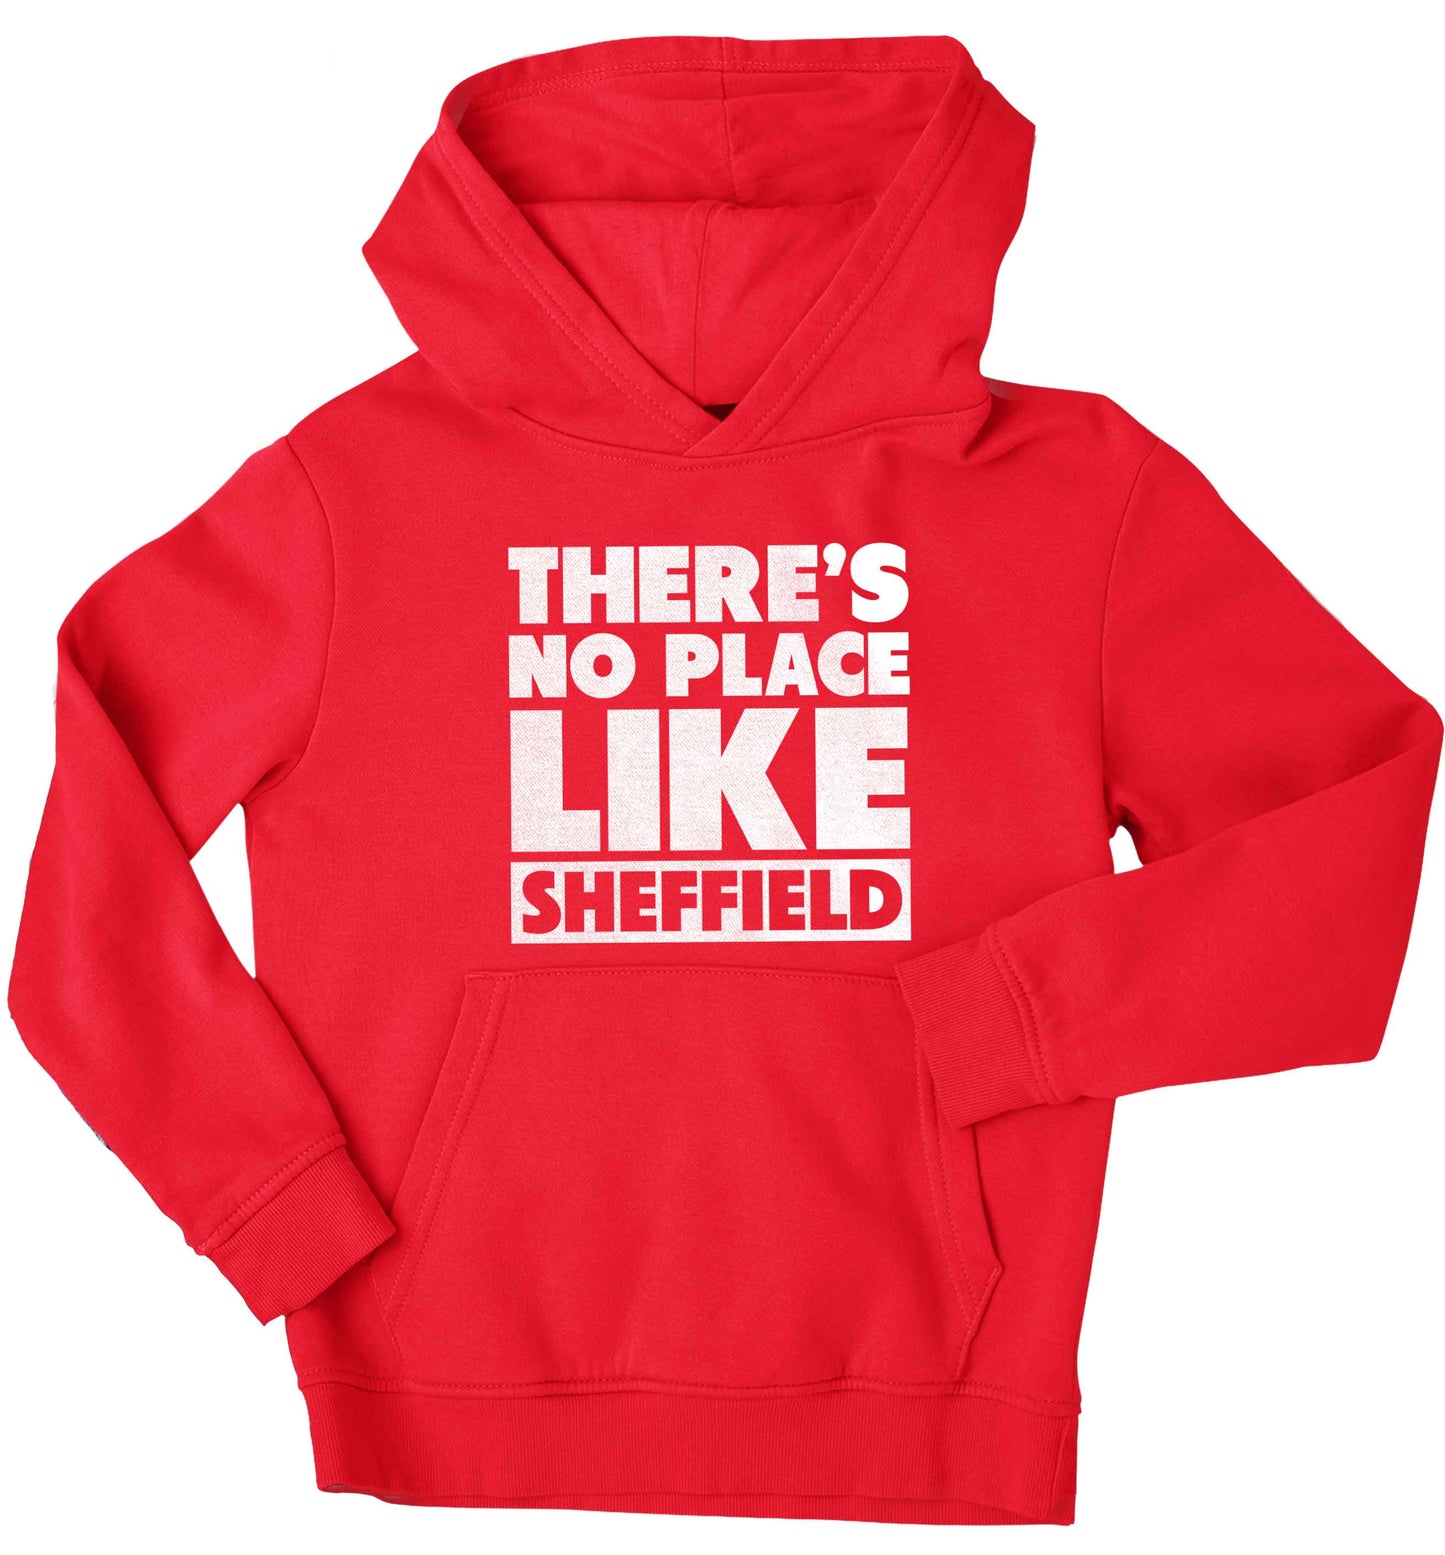 There's no place like Sheffield children's red hoodie 12-13 Years